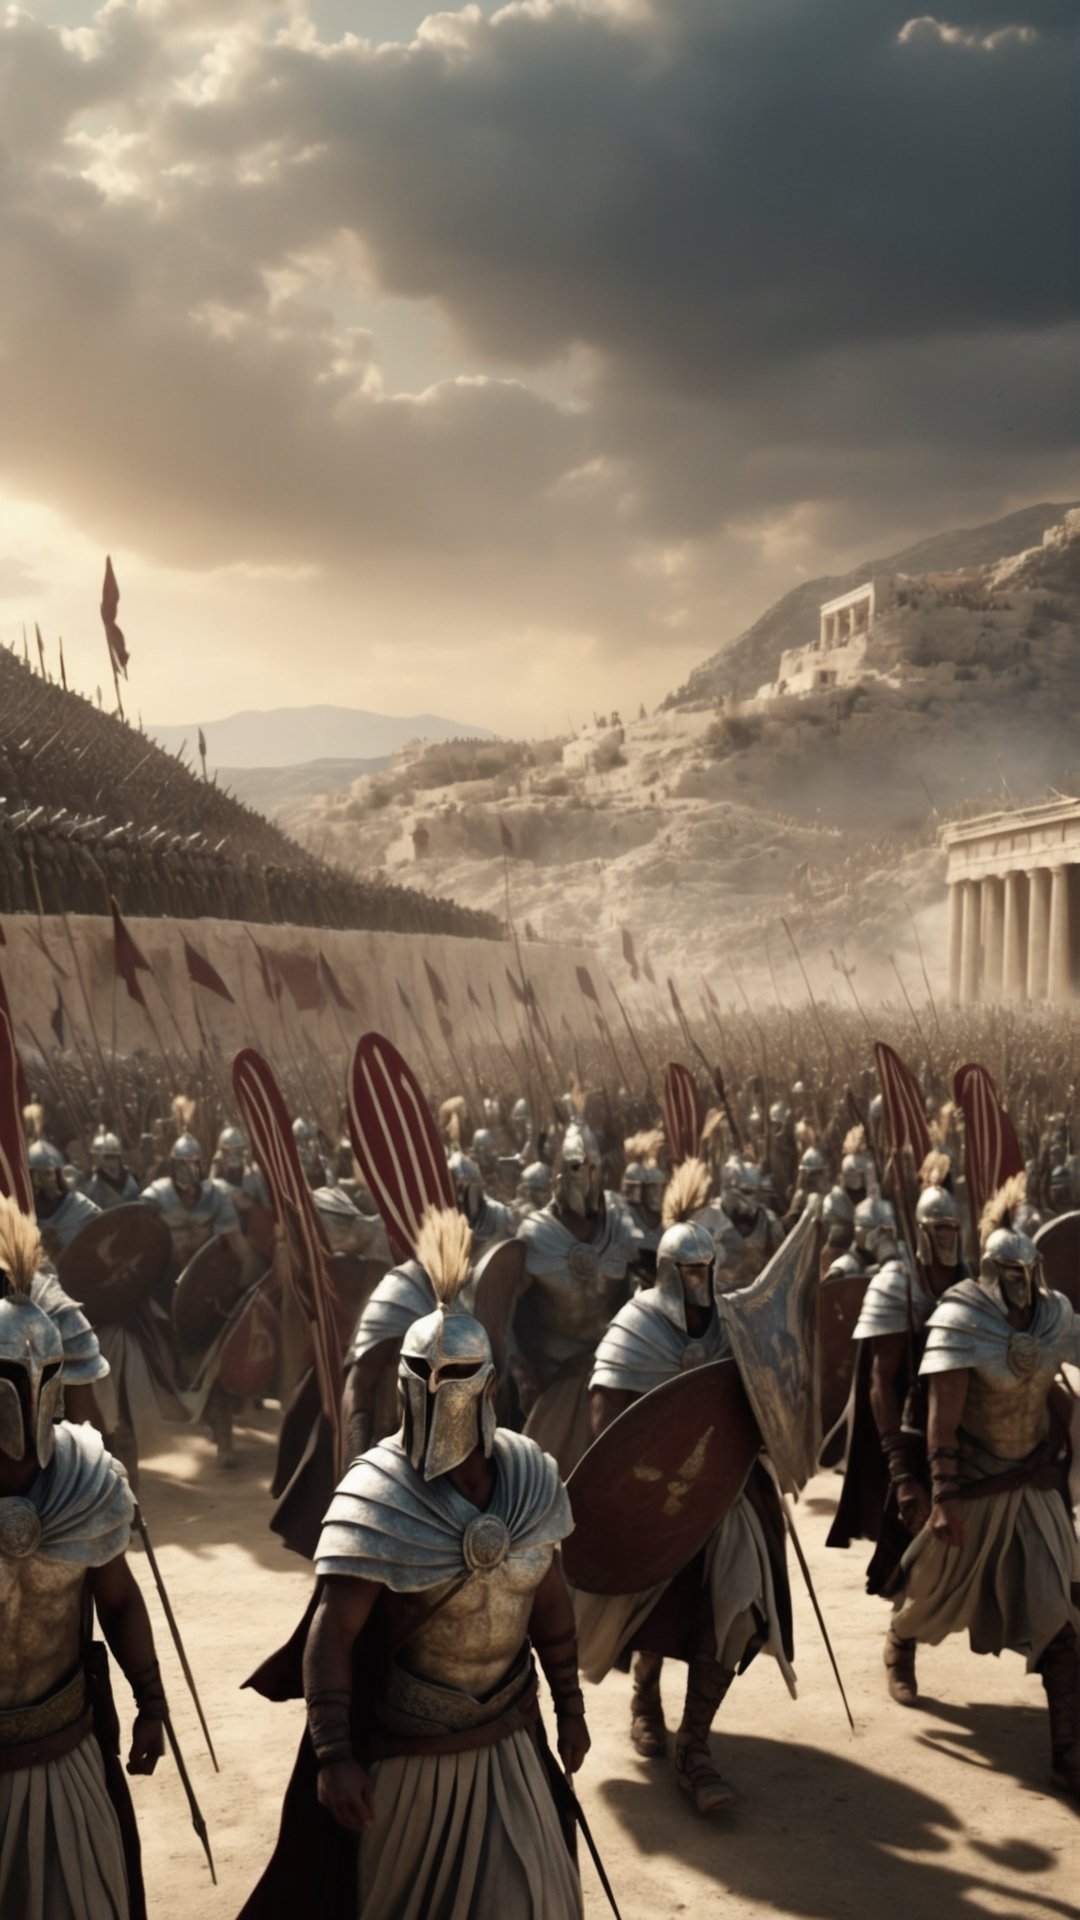 Xerxes leading a massive army, with banners fluttering in the wind, marching towards Greece. (Cinematic: Show the army advancing in a sweeping, epic shot with dramatic lighting) create hyperrealistic images